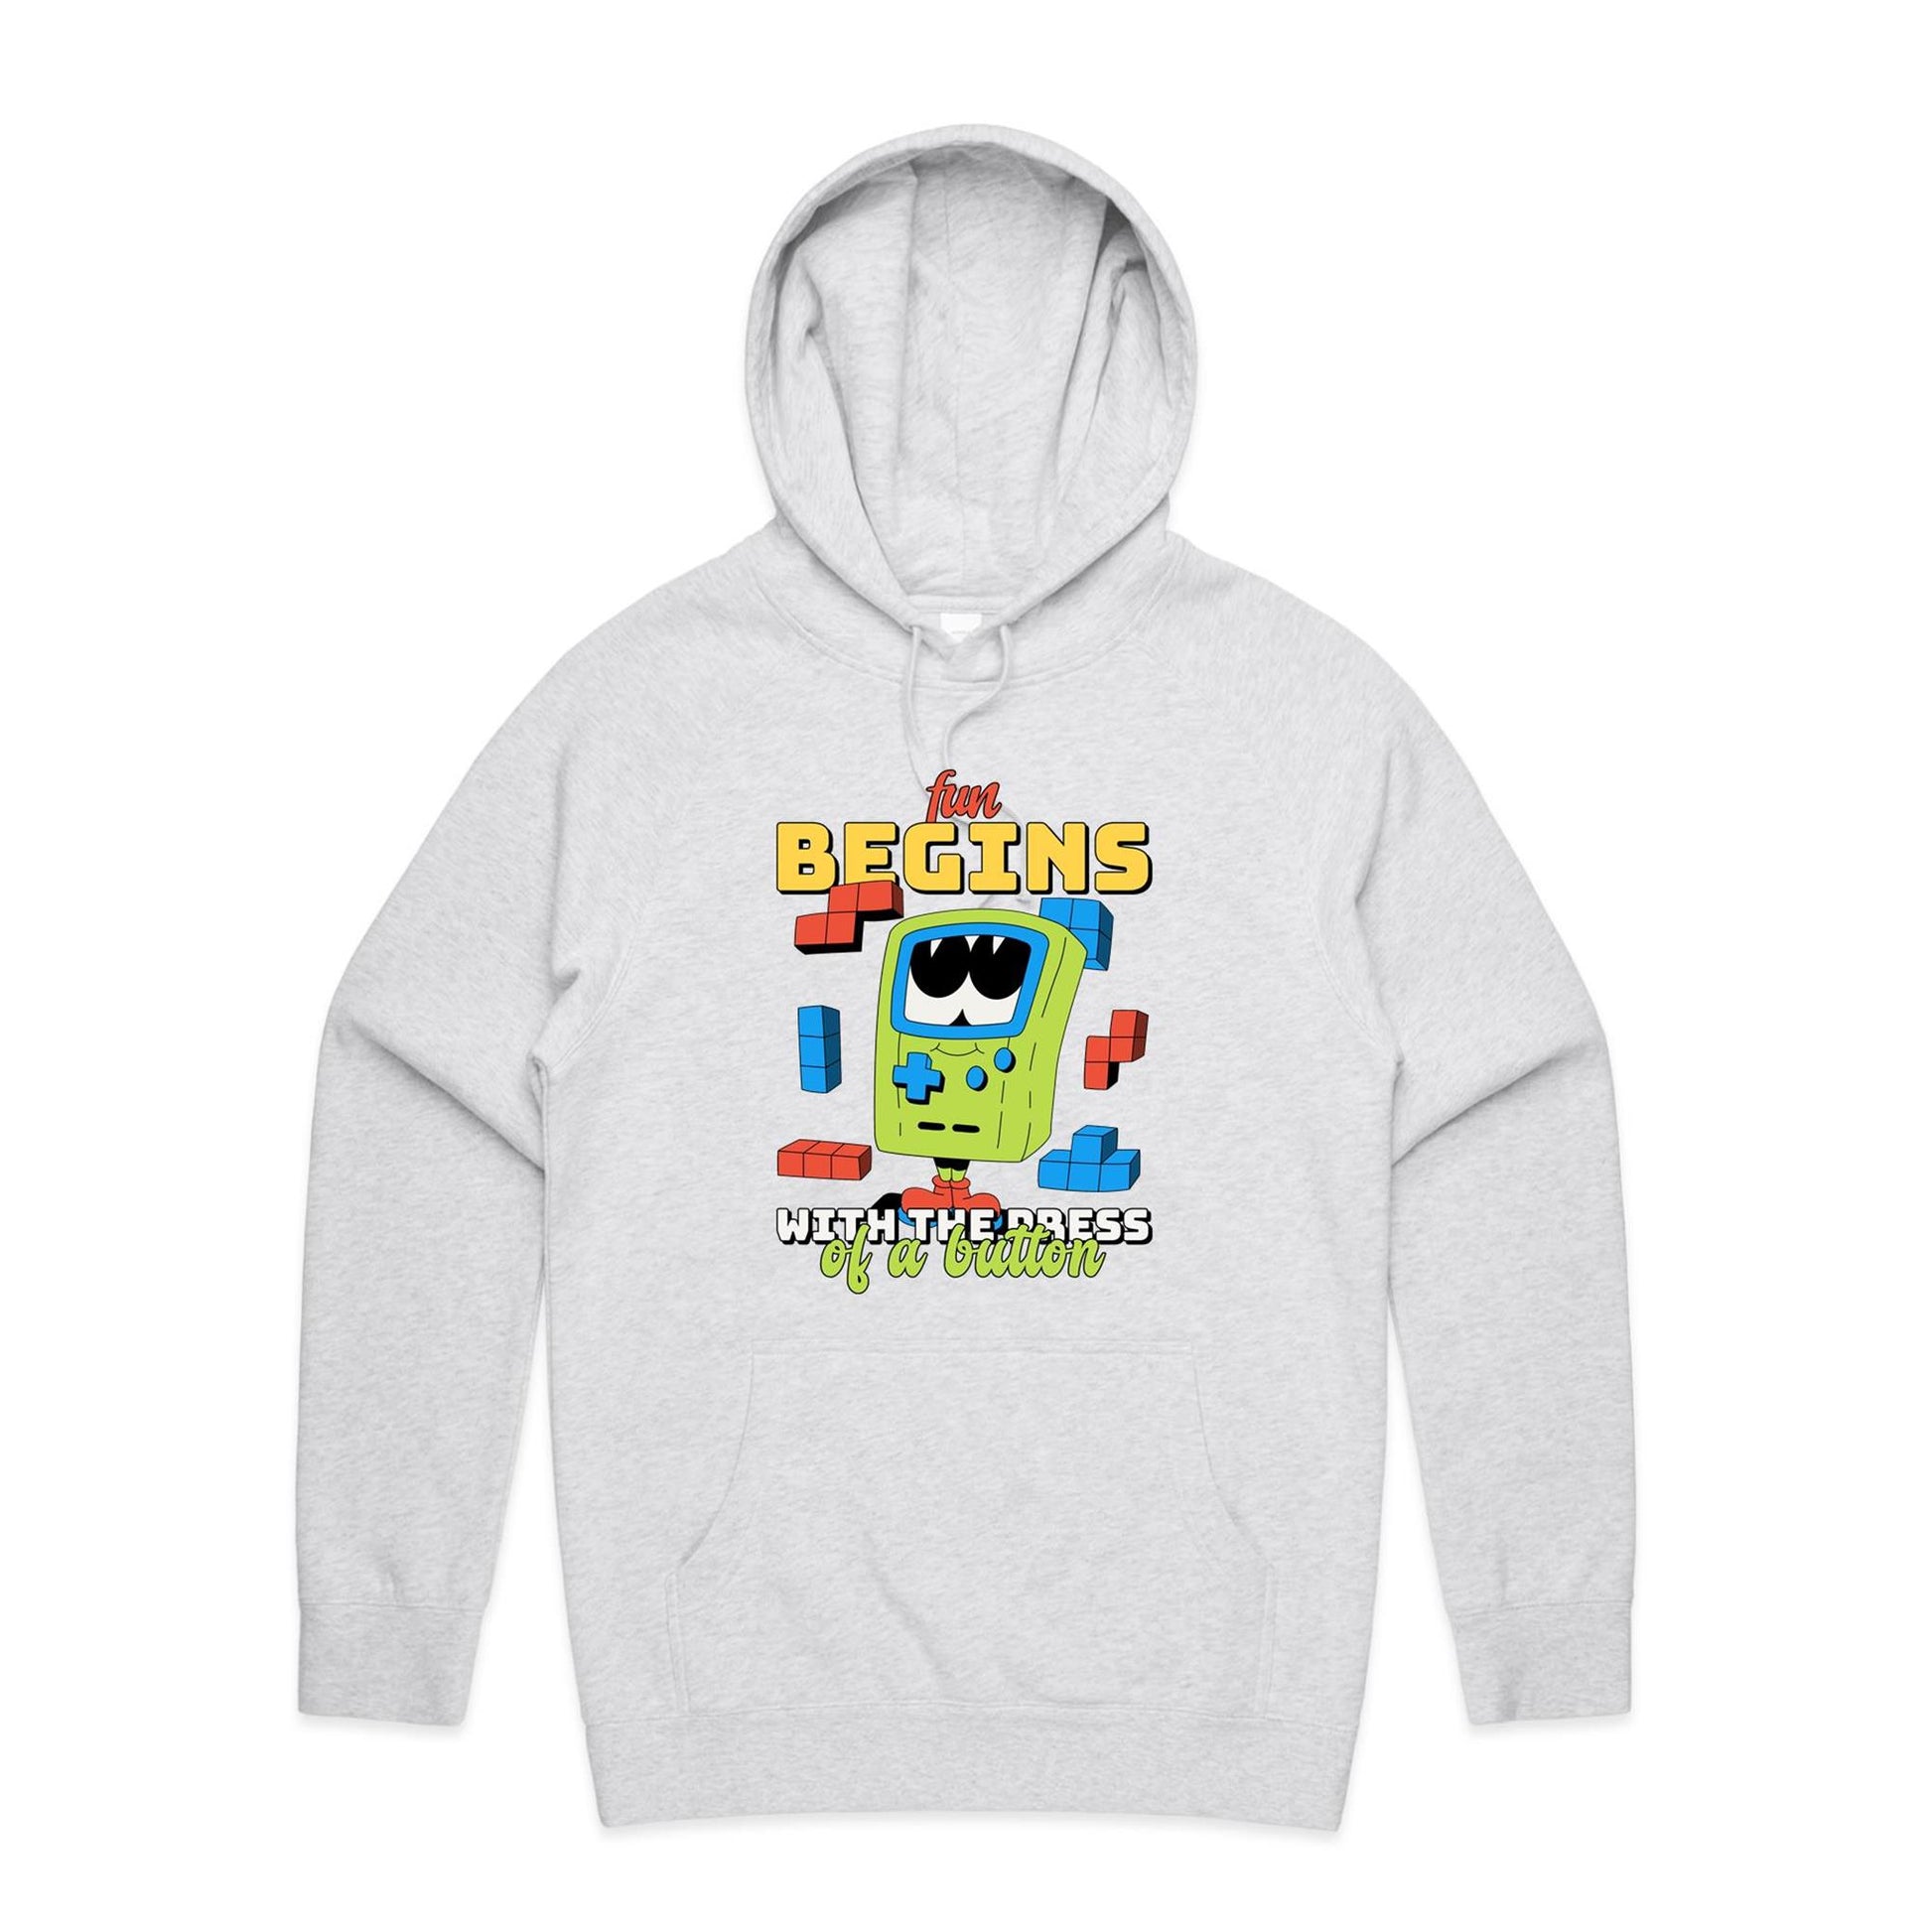 Fun Begins With The Press Of A Button - Supply Hood White Marle Mens Supply Hoodie Games